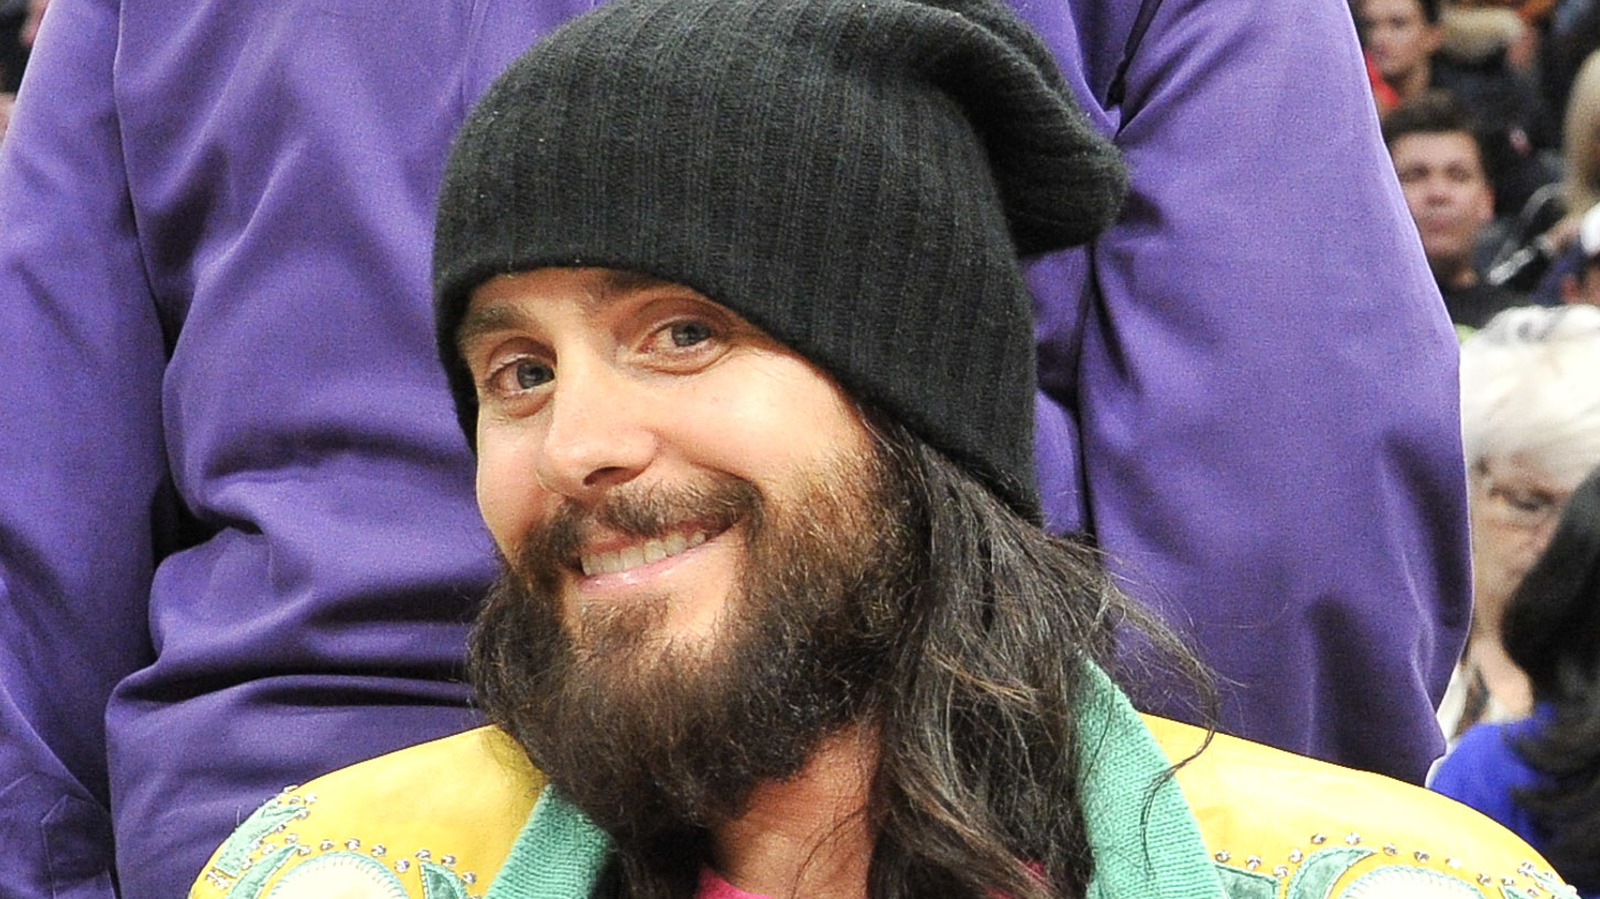 heres how much jared leto is really worth